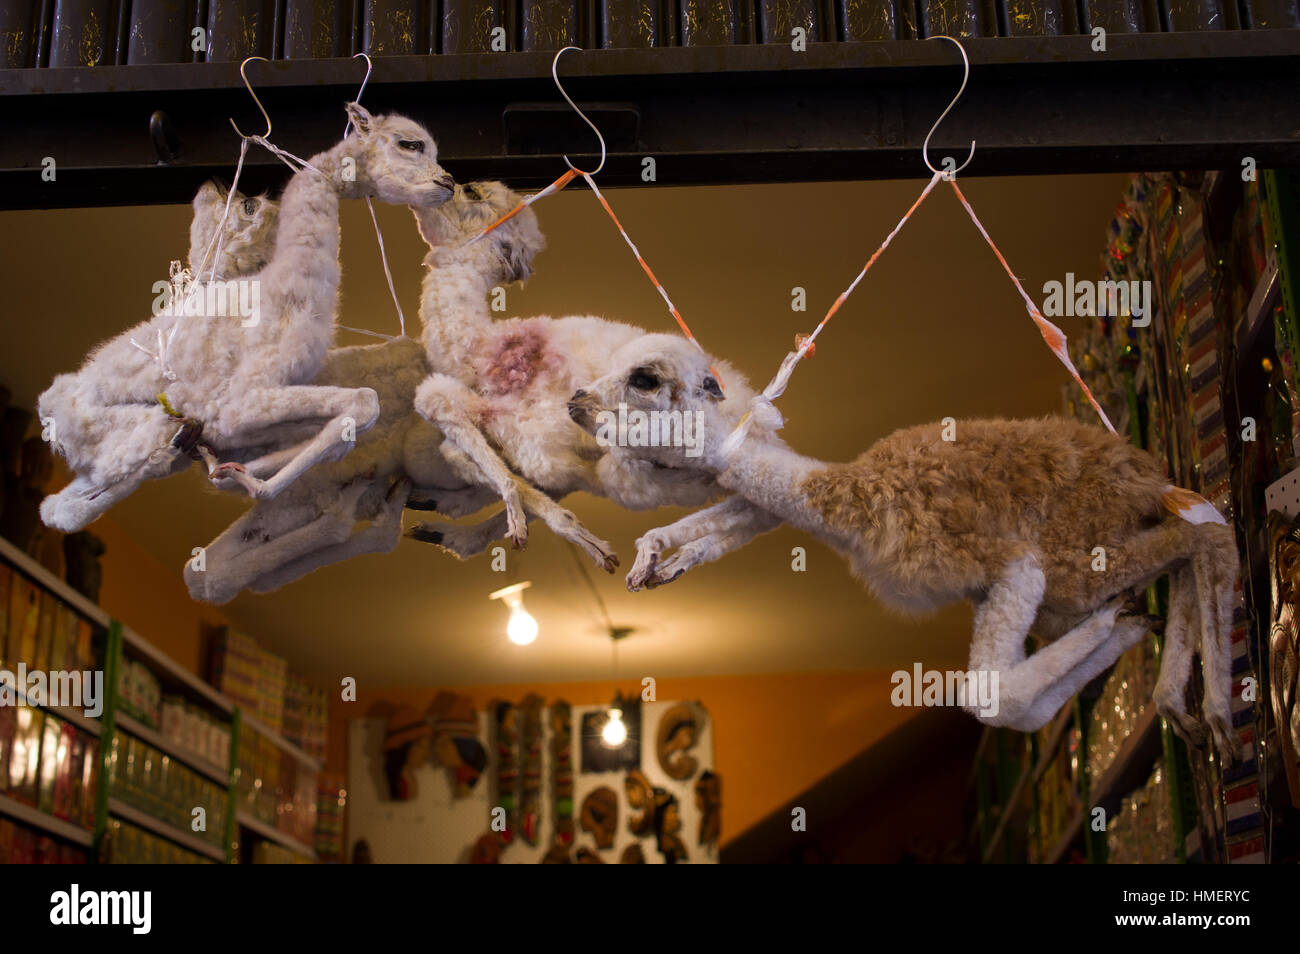 Llamas on display in the Witches Market in La Paz, Bolivia, for use in la mesa, a sacrifice to the pachamama, mother earth deity, especially in August Stock Photo